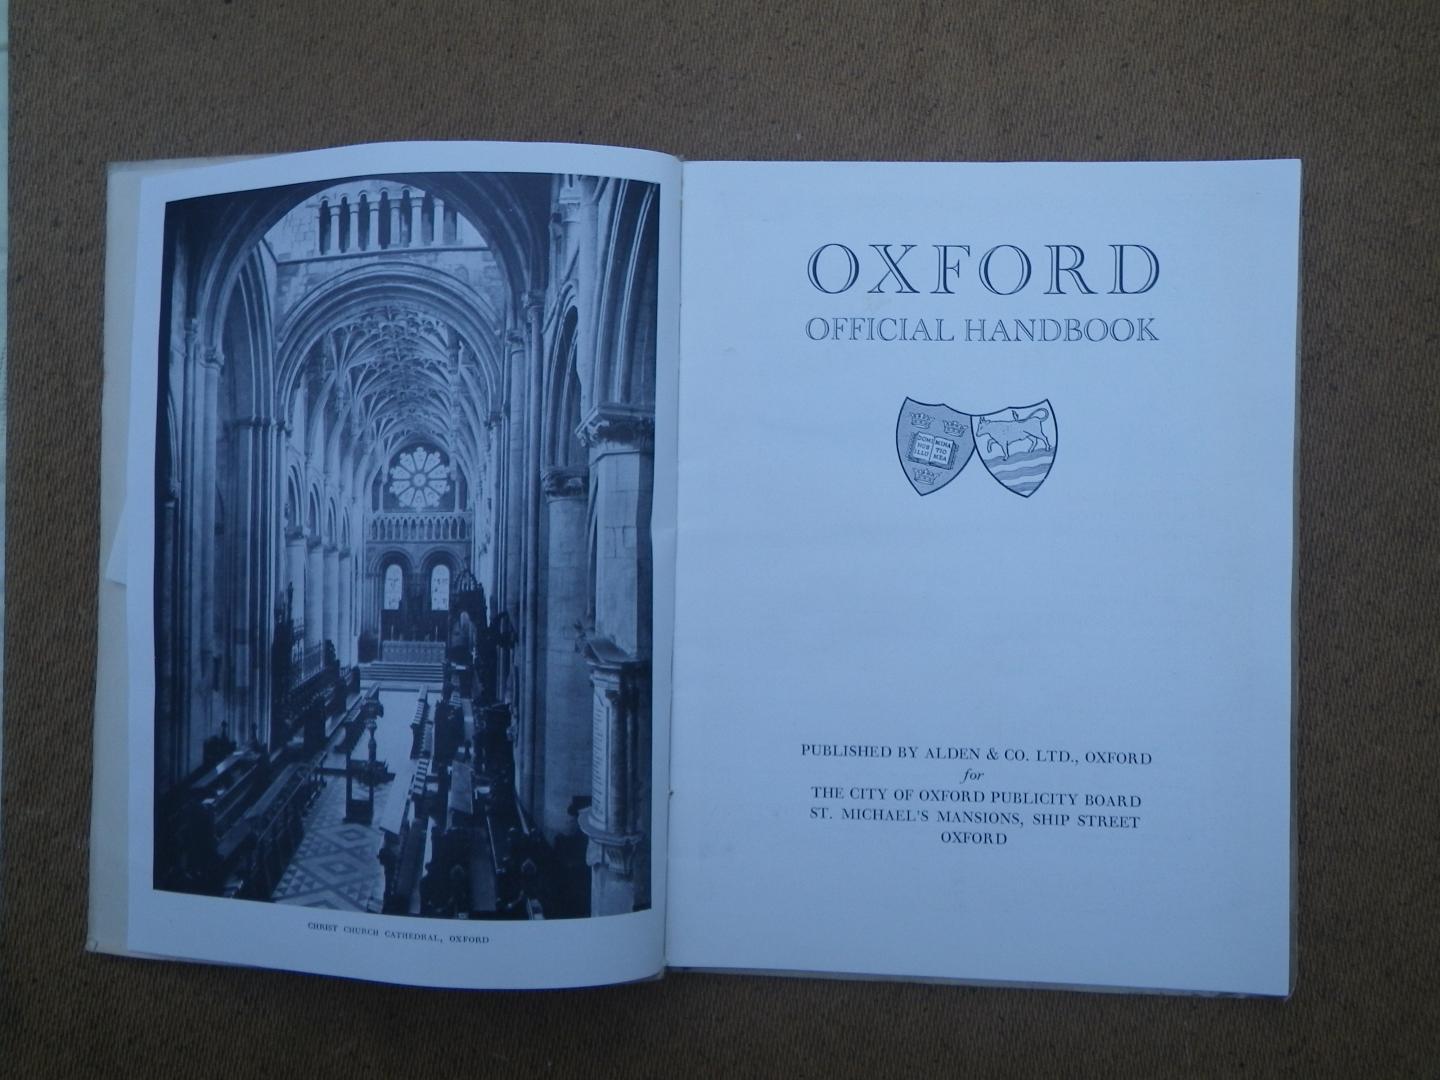 Lord Hugh Cecil forword - The City of Oxford. Official Handbook